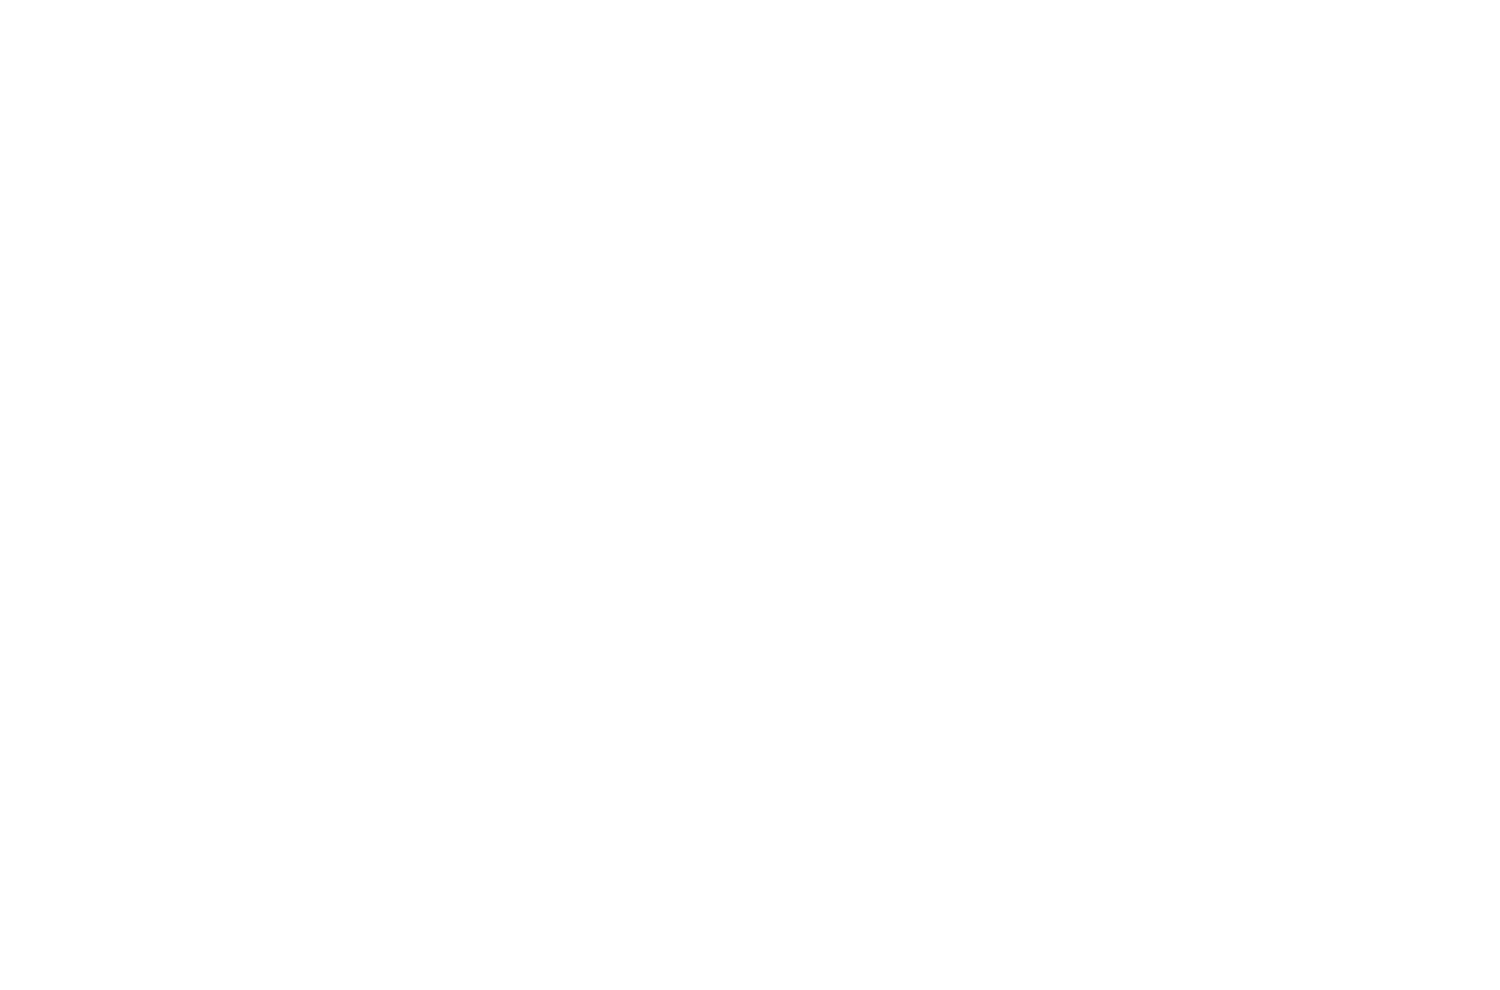 Launch Health Group